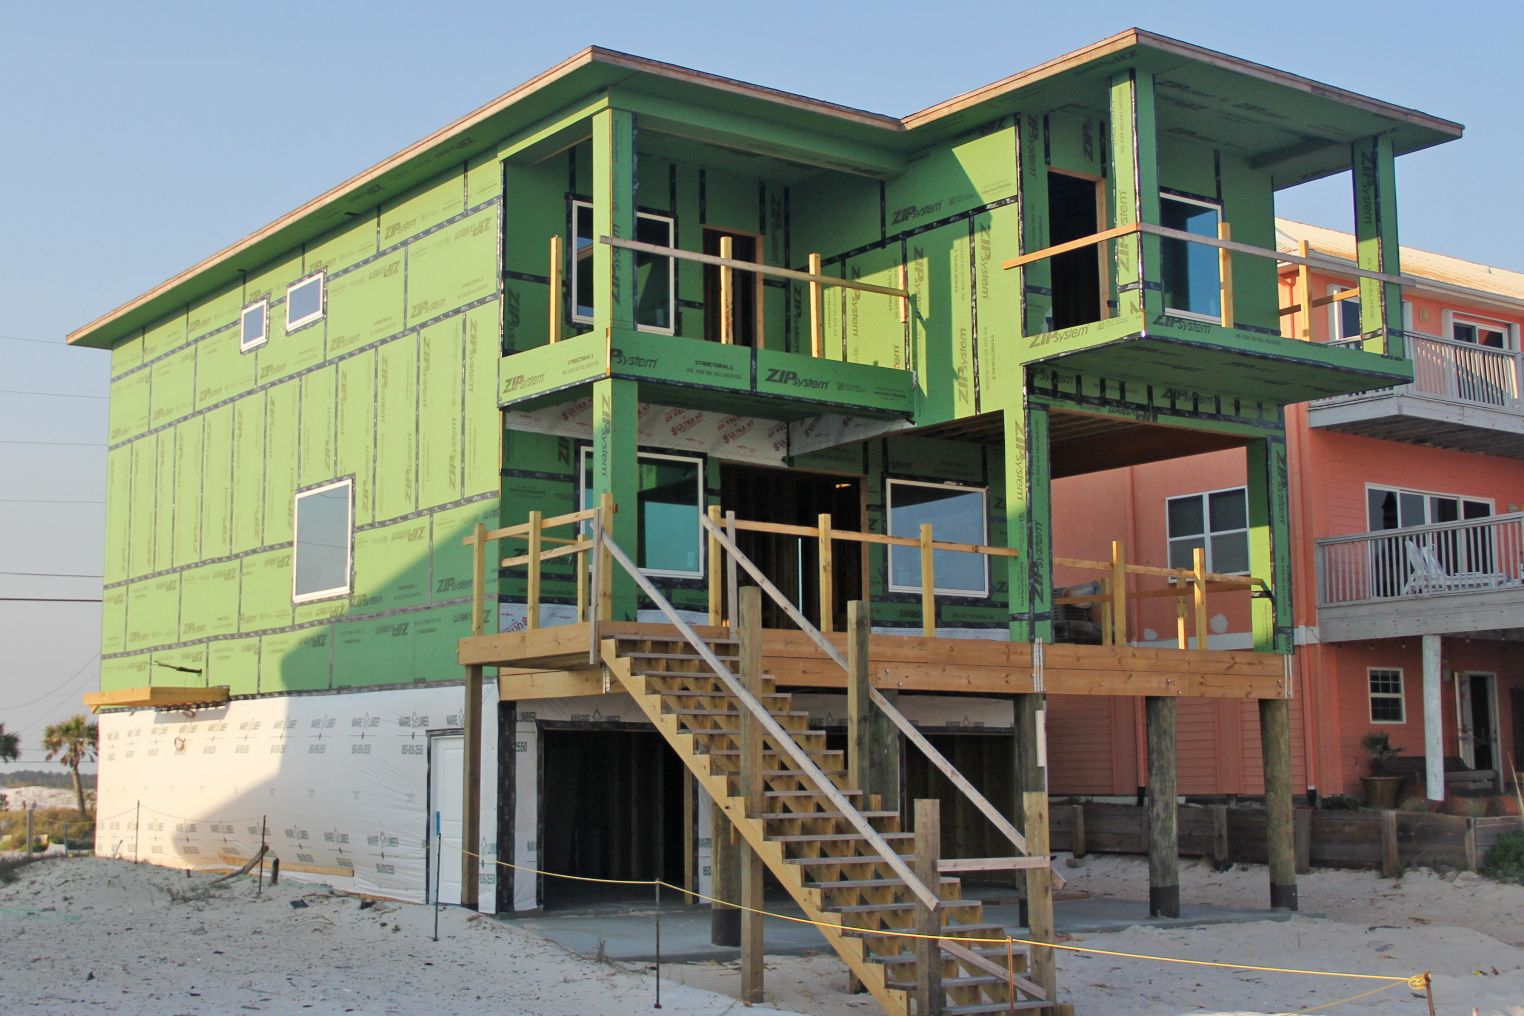 Smith coastal transitional style piling home on Navarre Beach